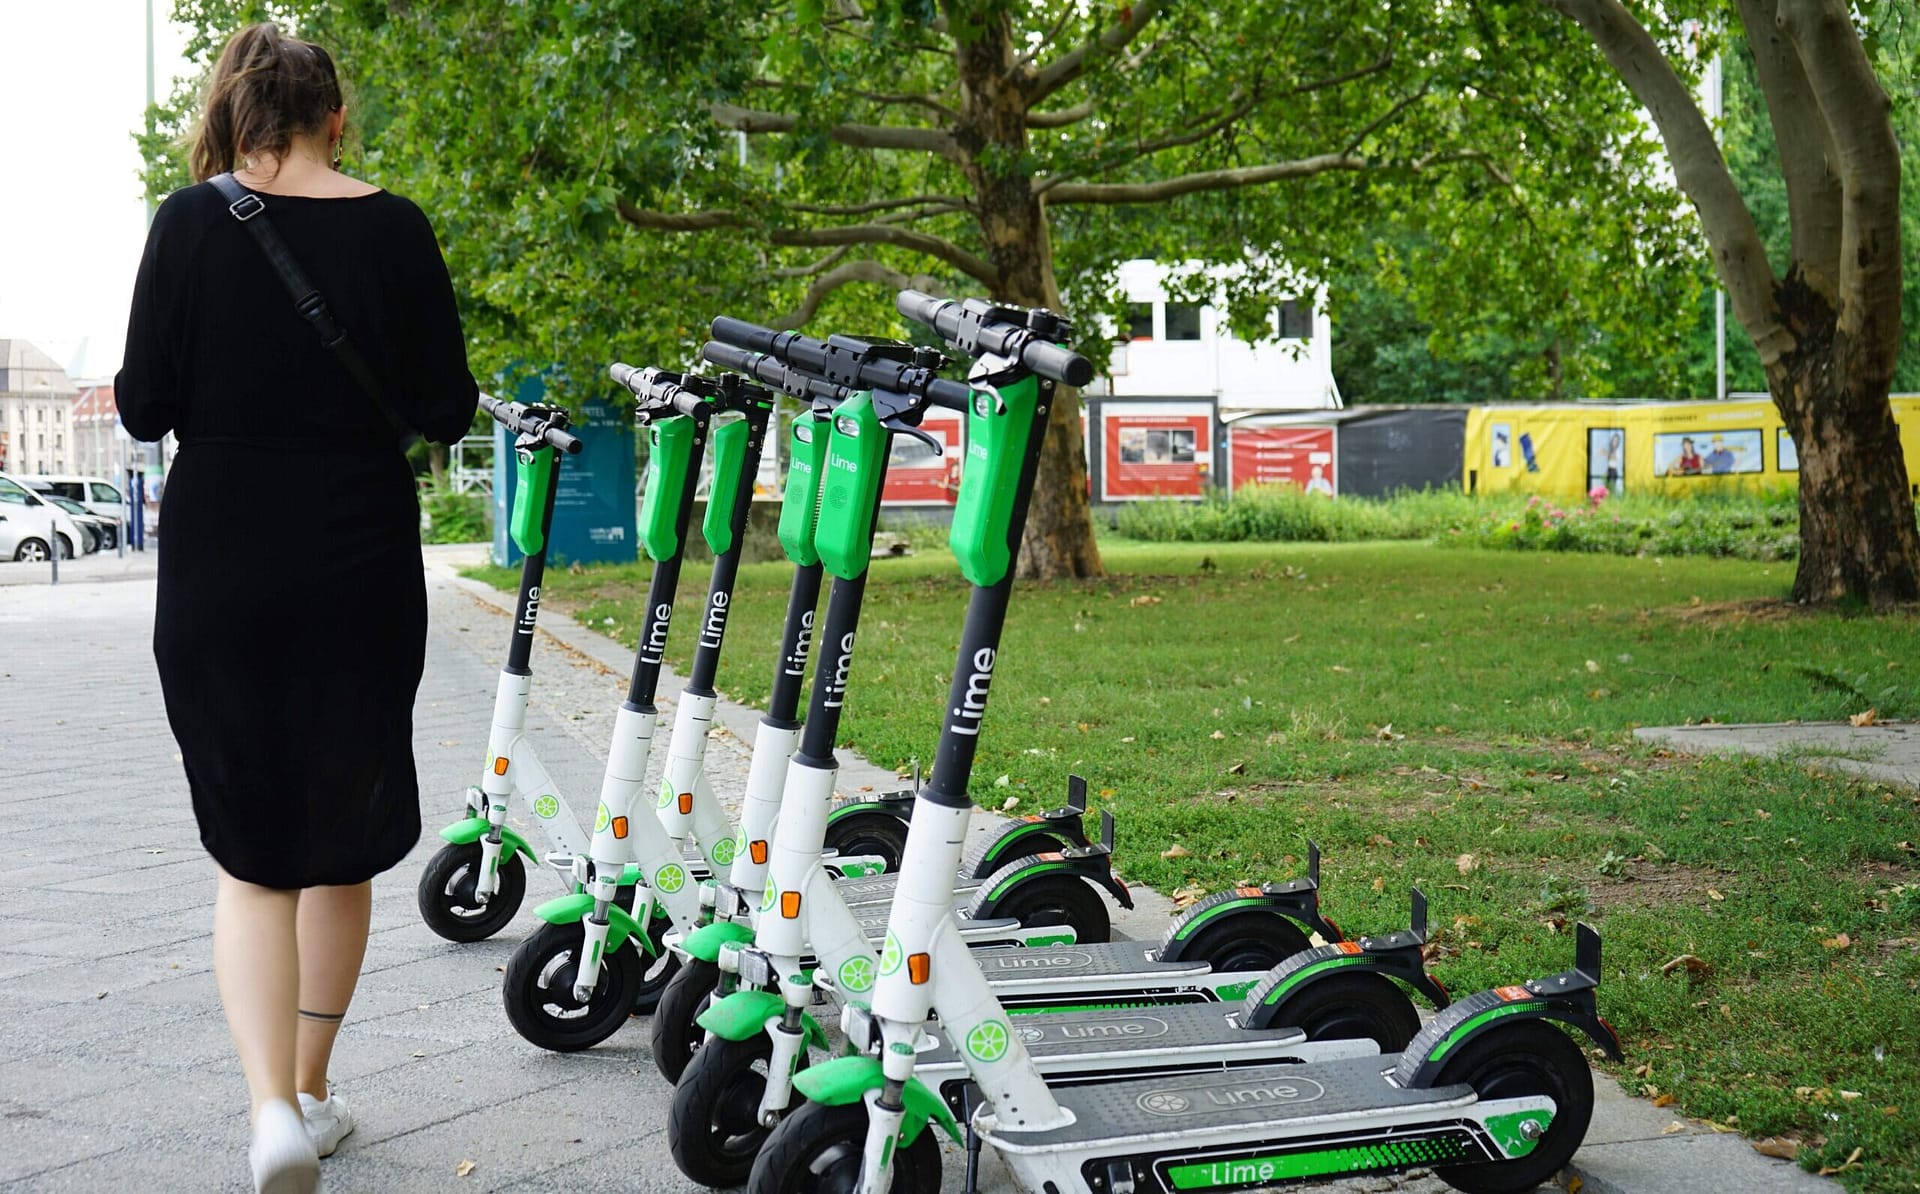 St. Louisans Able to Fly Around Town with Return of Bird Scooters